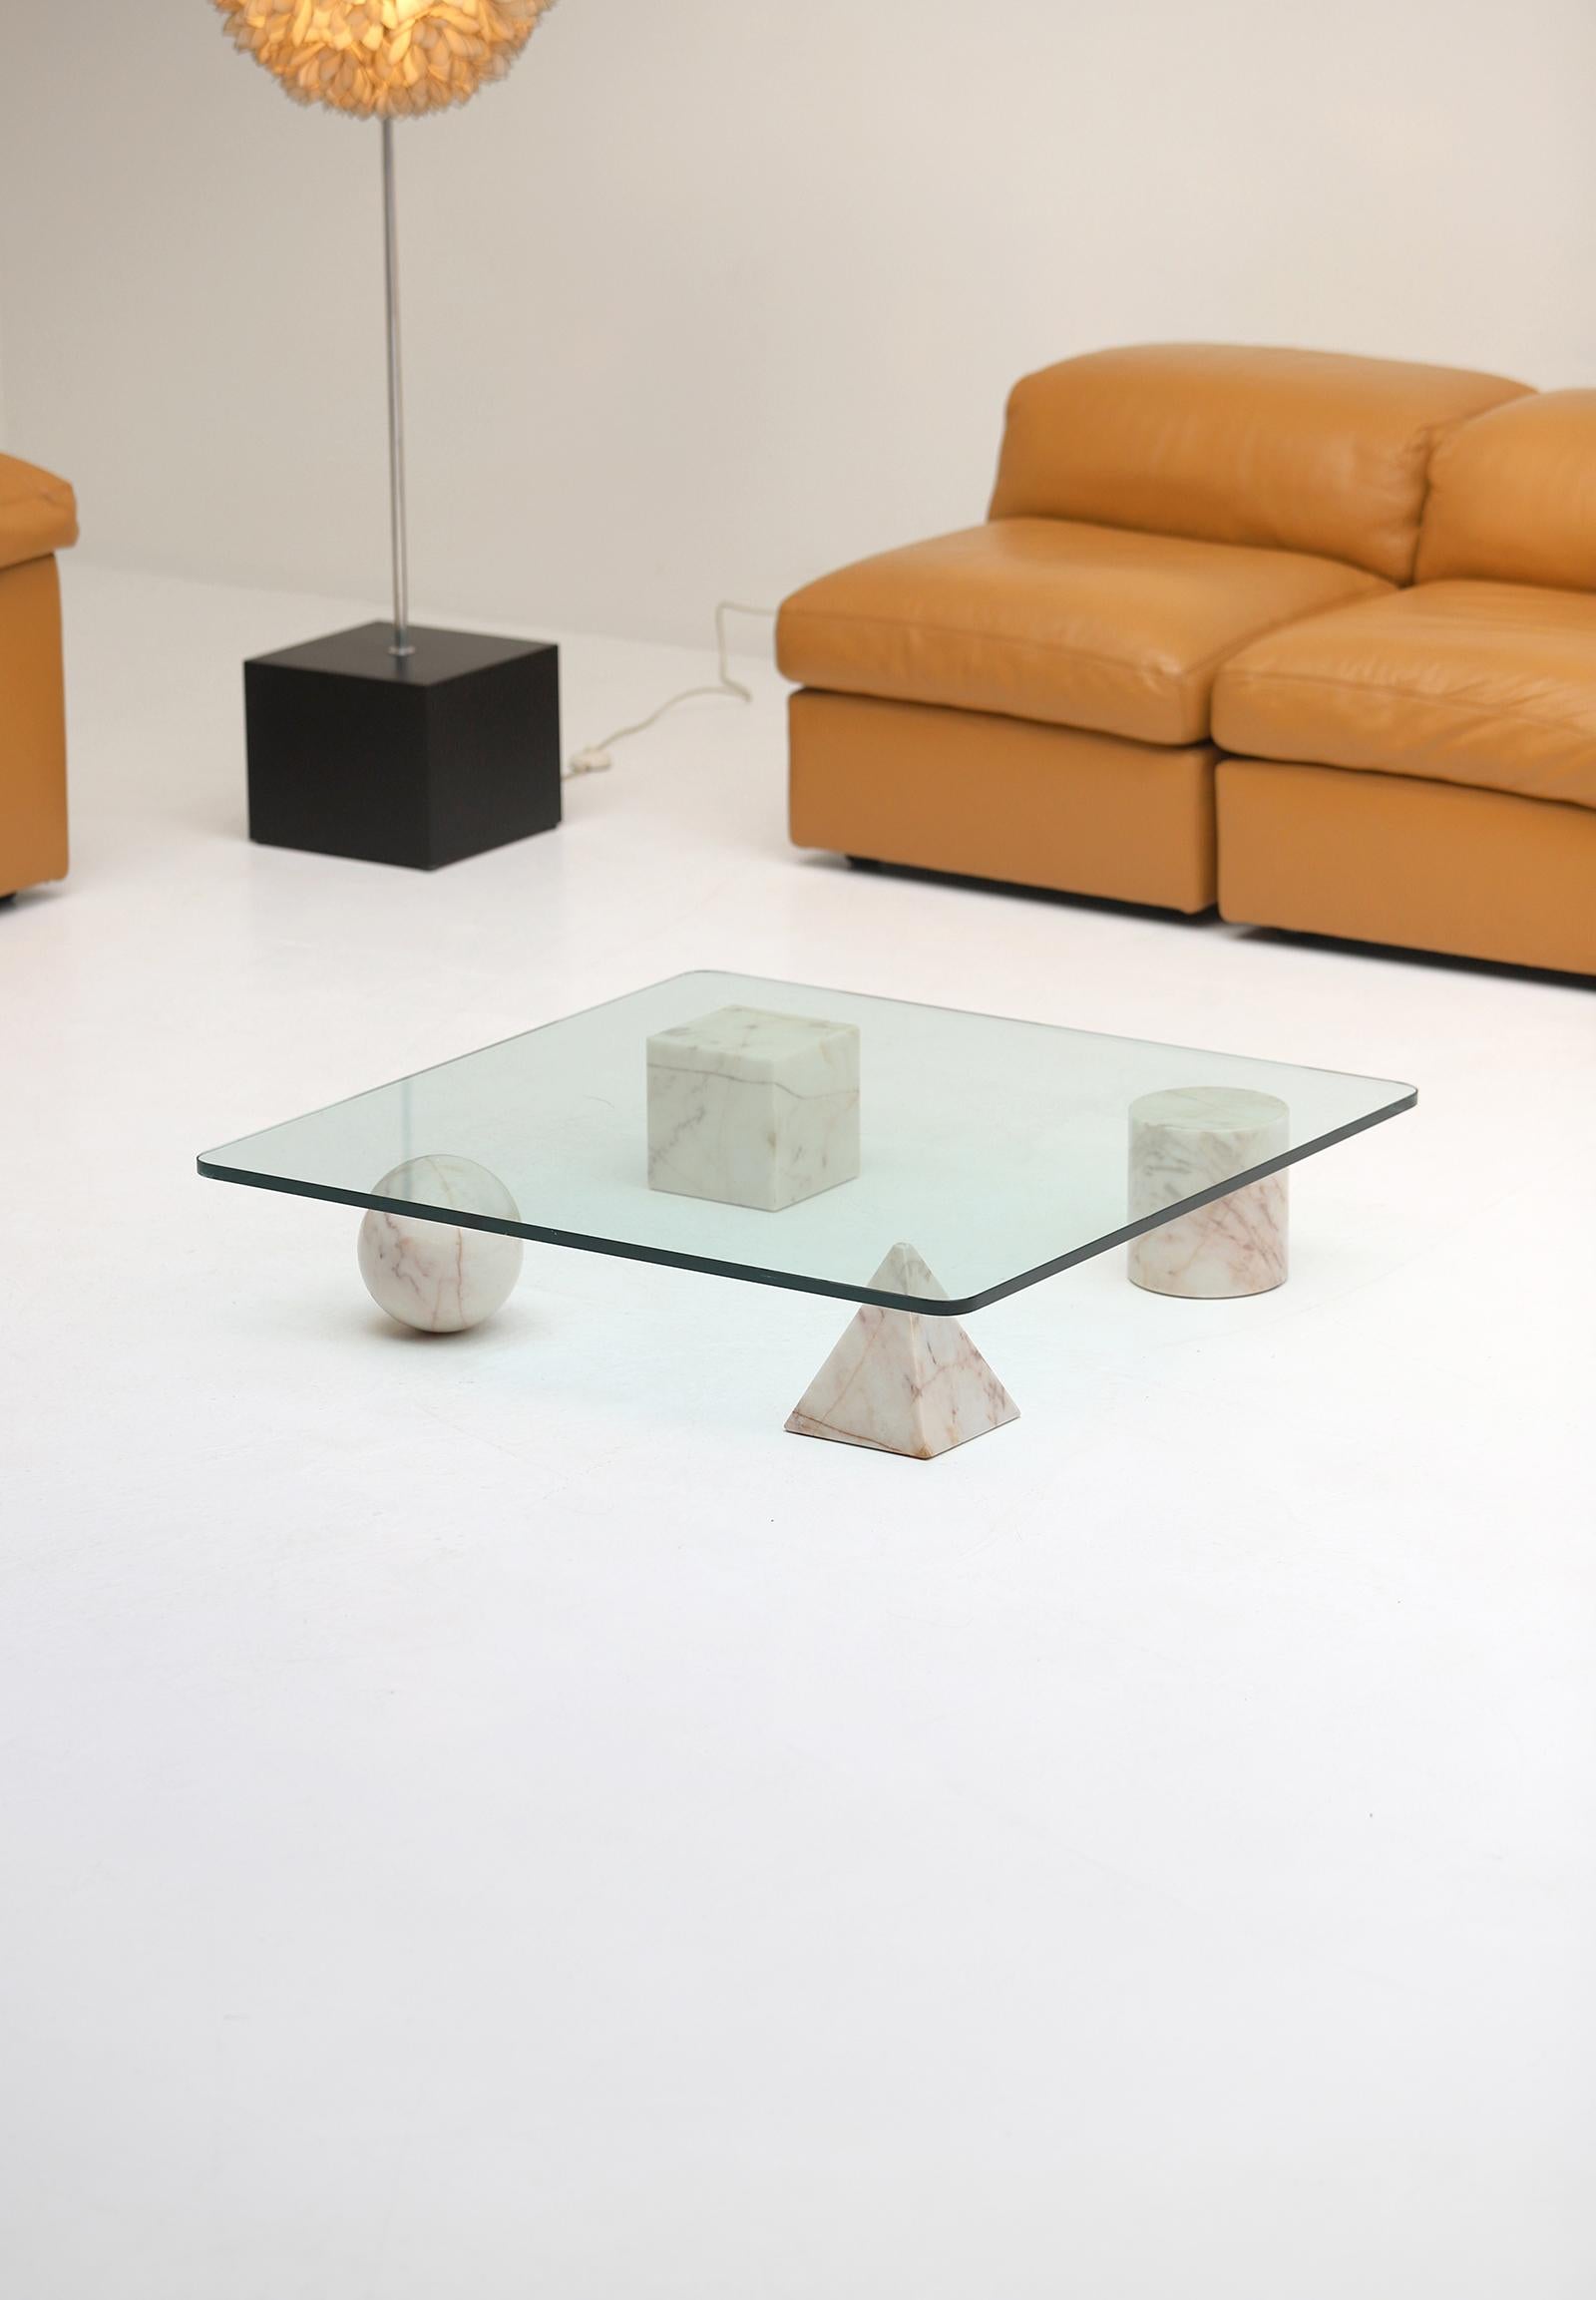 Decorative coffee table by Lella and Massimo Vignelli, designed in the 1970s. With a background in Architecture, Lella and Massimo Vignelli co-founded Vignelli Associates in 1971, New York. Vignelli worked in a wide variety of areas, including